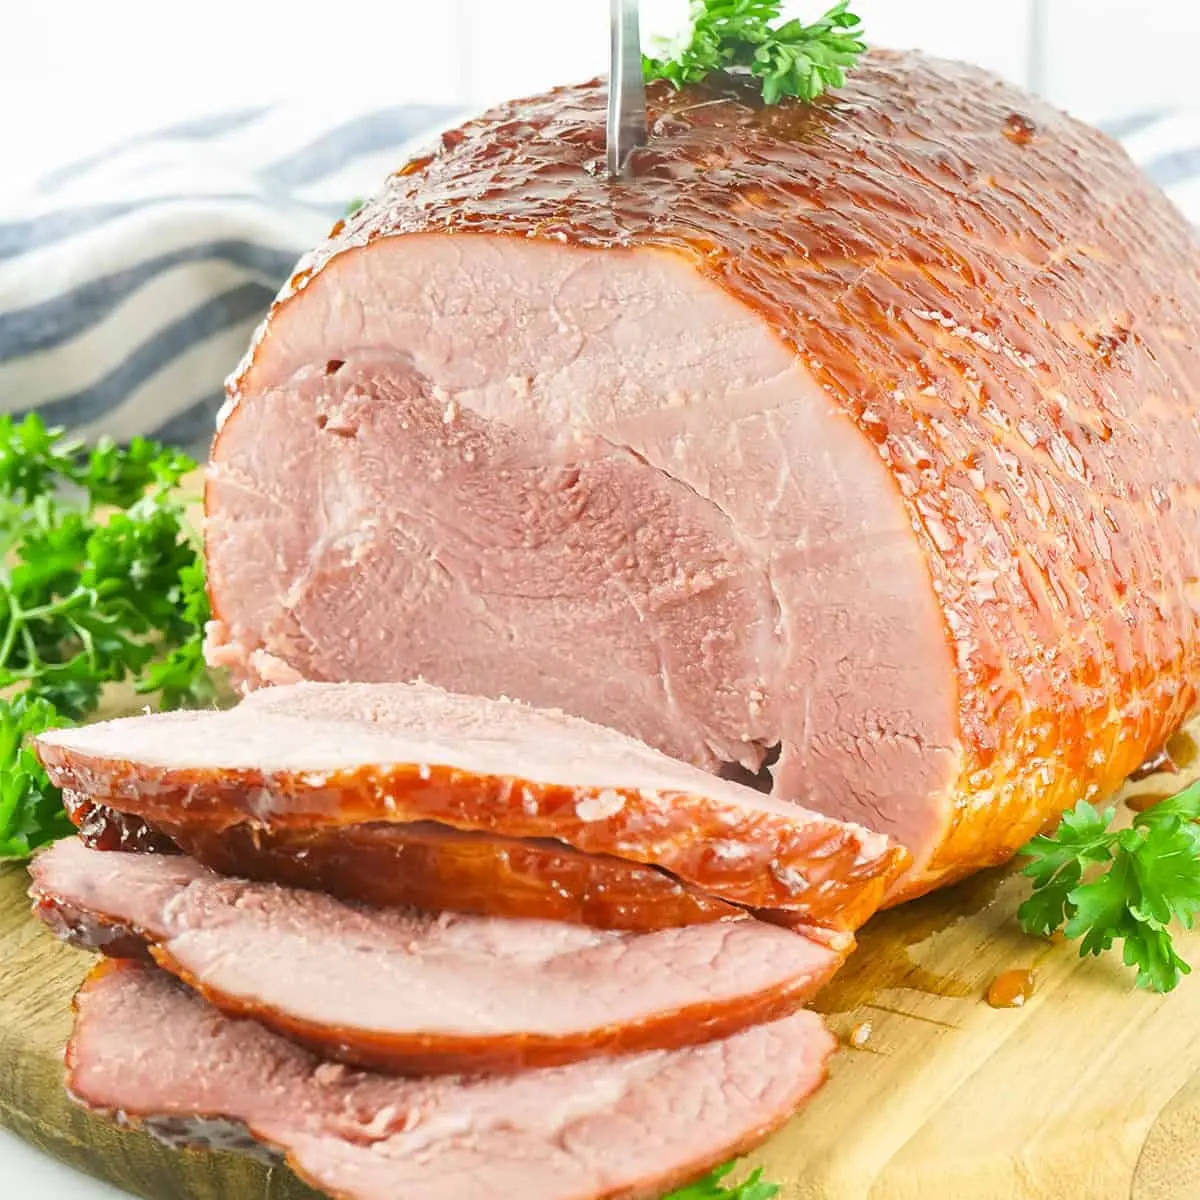 what is smoked ham - What is smoked ham made of